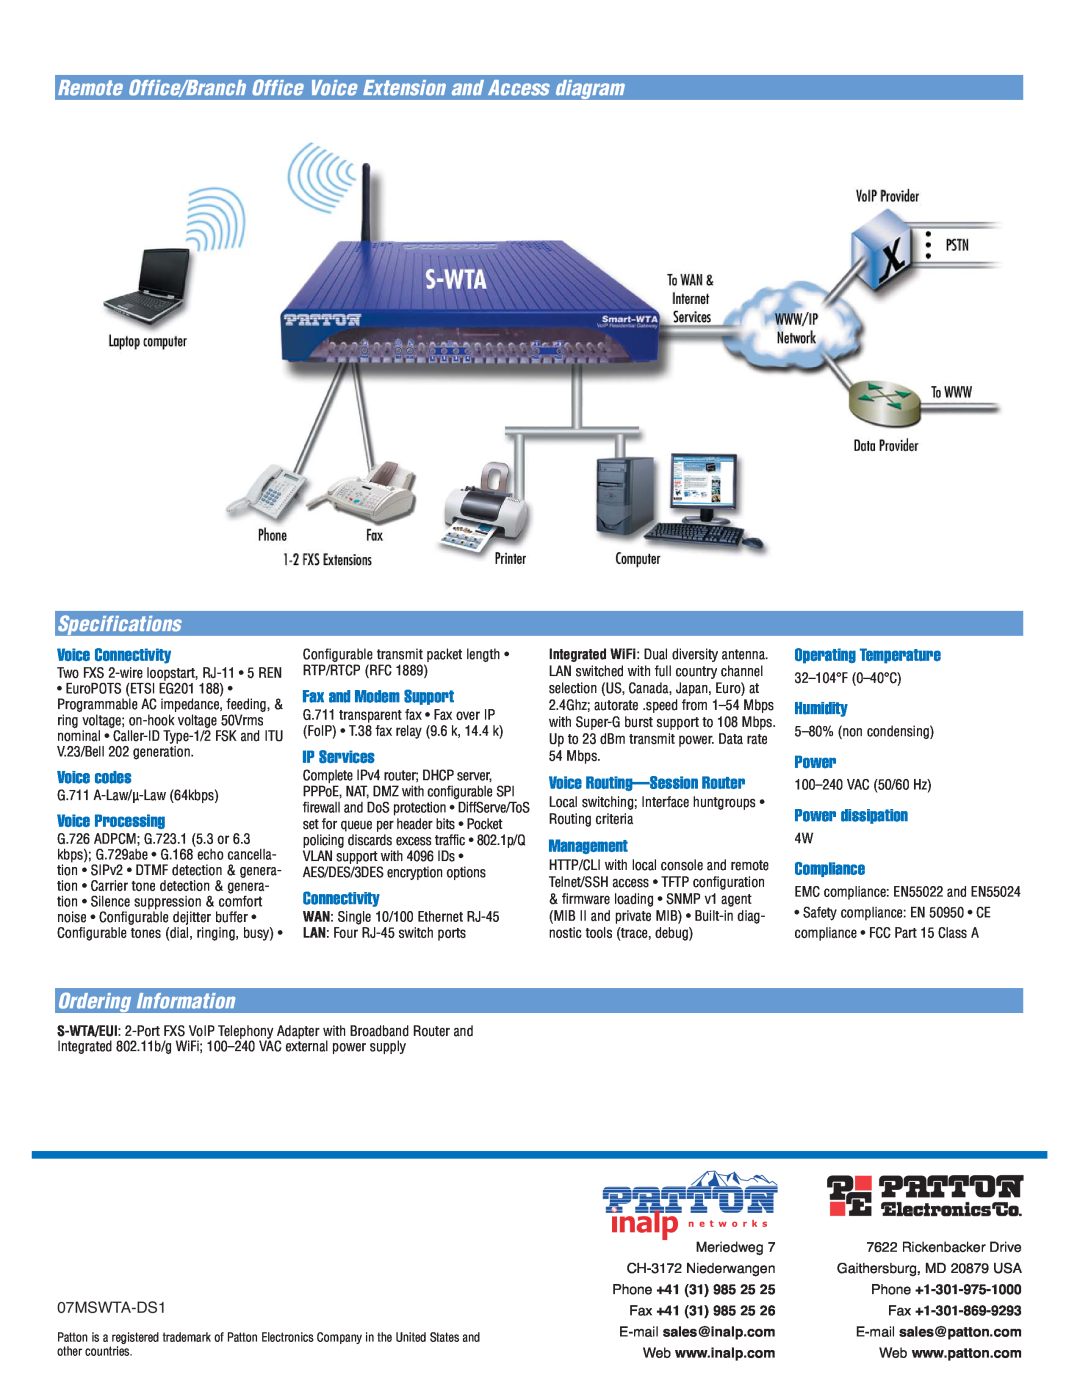 Patton electronic S-WTA manual Remote Office/Branch Office Voice Extension and Access diagram, Specifications 